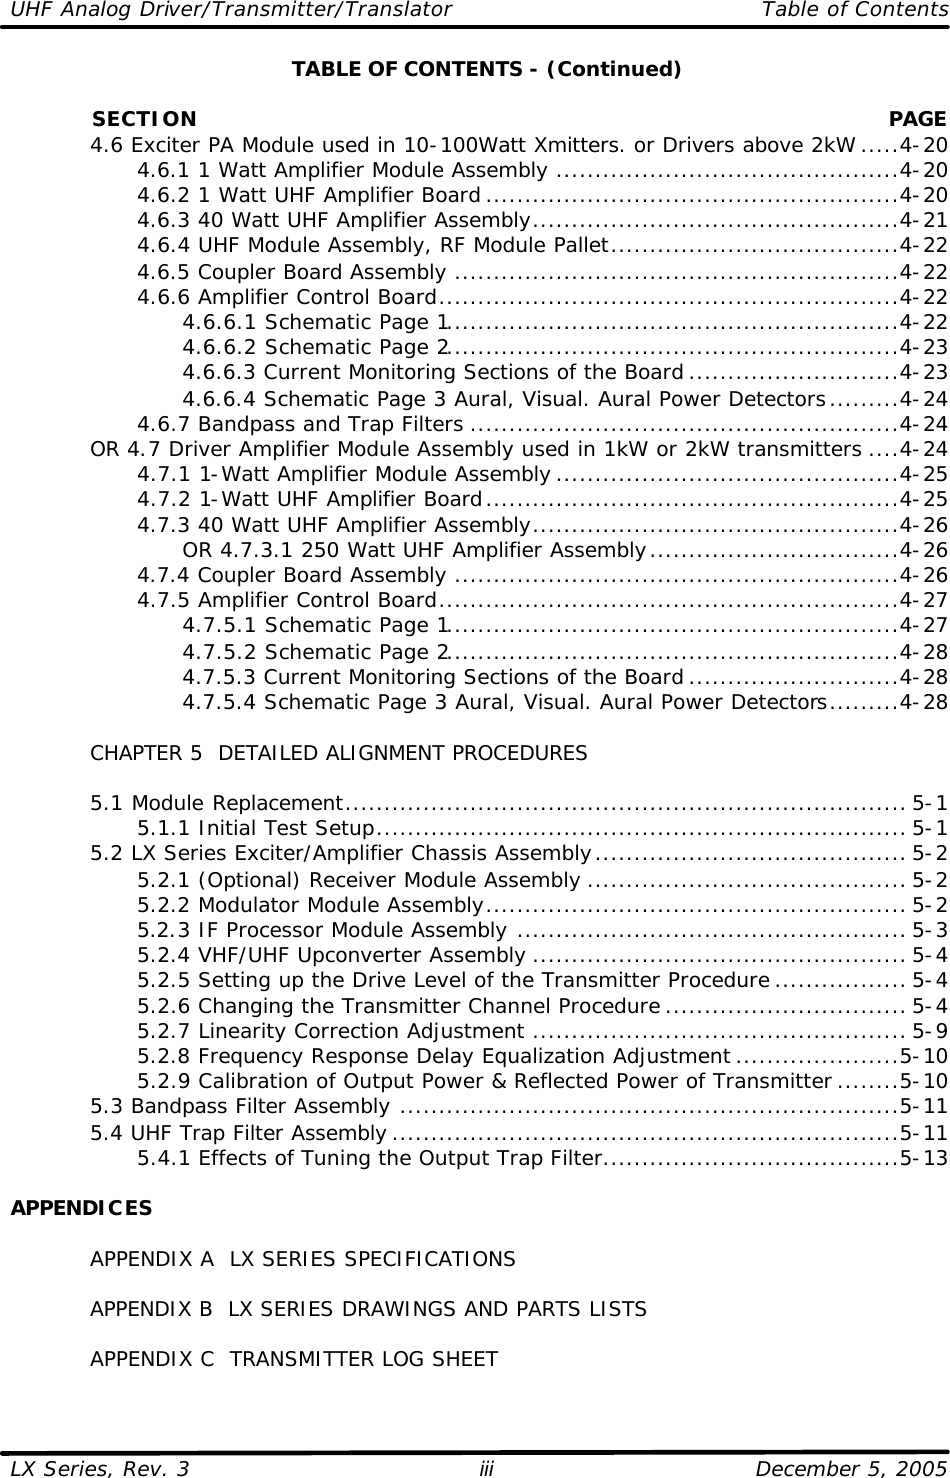 UHF Analog Driver/Transmitter/Translator   Table of Contents  LX Series, Rev. 3    December 5, 2005 iii TABLE OF CONTENTS - (Continued)              SECTION PAGE  4.6 Exciter PA Module used in 10-100Watt Xmitters. or Drivers above 2kW .....4-20     4.6.1 1 Watt Amplifier Module Assembly ............................................4-20     4.6.2 1 Watt UHF Amplifier Board .....................................................4-20     4.6.3 40 Watt UHF Amplifier Assembly...............................................4-21     4.6.4 UHF Module Assembly, RF Module Pallet.....................................4-22     4.6.5 Coupler Board Assembly .........................................................4-22     4.6.6 Amplifier Control Board...........................................................4-22       4.6.6.1 Schematic Page 1..........................................................4-22       4.6.6.2 Schematic Page 2..........................................................4-23       4.6.6.3 Current Monitoring Sections of the Board ...........................4-23       4.6.6.4 Schematic Page 3 Aural, Visual. Aural Power Detectors.........4-24     4.6.7 Bandpass and Trap Filters .......................................................4-24  OR 4.7 Driver Amplifier Module Assembly used in 1kW or 2kW transmitters ....4-24     4.7.1 1-Watt Amplifier Module Assembly ............................................4-25     4.7.2 1-Watt UHF Amplifier Board.....................................................4-25     4.7.3 40 Watt UHF Amplifier Assembly...............................................4-26       OR 4.7.3.1 250 Watt UHF Amplifier Assembly................................4-26     4.7.4 Coupler Board Assembly .........................................................4-26     4.7.5 Amplifier Control Board...........................................................4-27       4.7.5.1 Schematic Page 1..........................................................4-27       4.7.5.2 Schematic Page 2..........................................................4-28       4.7.5.3 Current Monitoring Sections of the Board ...........................4-28       4.7.5.4 Schematic Page 3 Aural, Visual. Aural Power Detectors.........4-28   CHAPTER 5  DETAILED ALIGNMENT PROCEDURES   5.1 Module Replacement........................................................................ 5-1     5.1.1 Initial Test Setup.................................................................... 5-1  5.2 LX Series Exciter/Amplifier Chassis Assembly........................................ 5-2     5.2.1 (Optional) Receiver Module Assembly ......................................... 5-2     5.2.2 Modulator Module Assembly...................................................... 5-2     5.2.3 IF Processor Module Assembly .................................................. 5-3     5.2.4 VHF/UHF Upconverter Assembly ................................................ 5-4     5.2.5 Setting up the Drive Level of the Transmitter Procedure ................. 5-4     5.2.6 Changing the Transmitter Channel Procedure ............................... 5-4     5.2.7 Linearity Correction Adjustment ................................................ 5-9     5.2.8 Frequency Response Delay Equalization Adjustment .....................5-10     5.2.9 Calibration of Output Power &amp; Reflected Power of Transmitter ........5-10  5.3 Bandpass Filter Assembly ................................................................5-11  5.4 UHF Trap Filter Assembly .................................................................5-11     5.4.1 Effects of Tuning the Output Trap Filter......................................5-13  APPENDICES   APPENDIX A  LX SERIES SPECIFICATIONS   APPENDIX B  LX SERIES DRAWINGS AND PARTS LISTS   APPENDIX C  TRANSMITTER LOG SHEET  